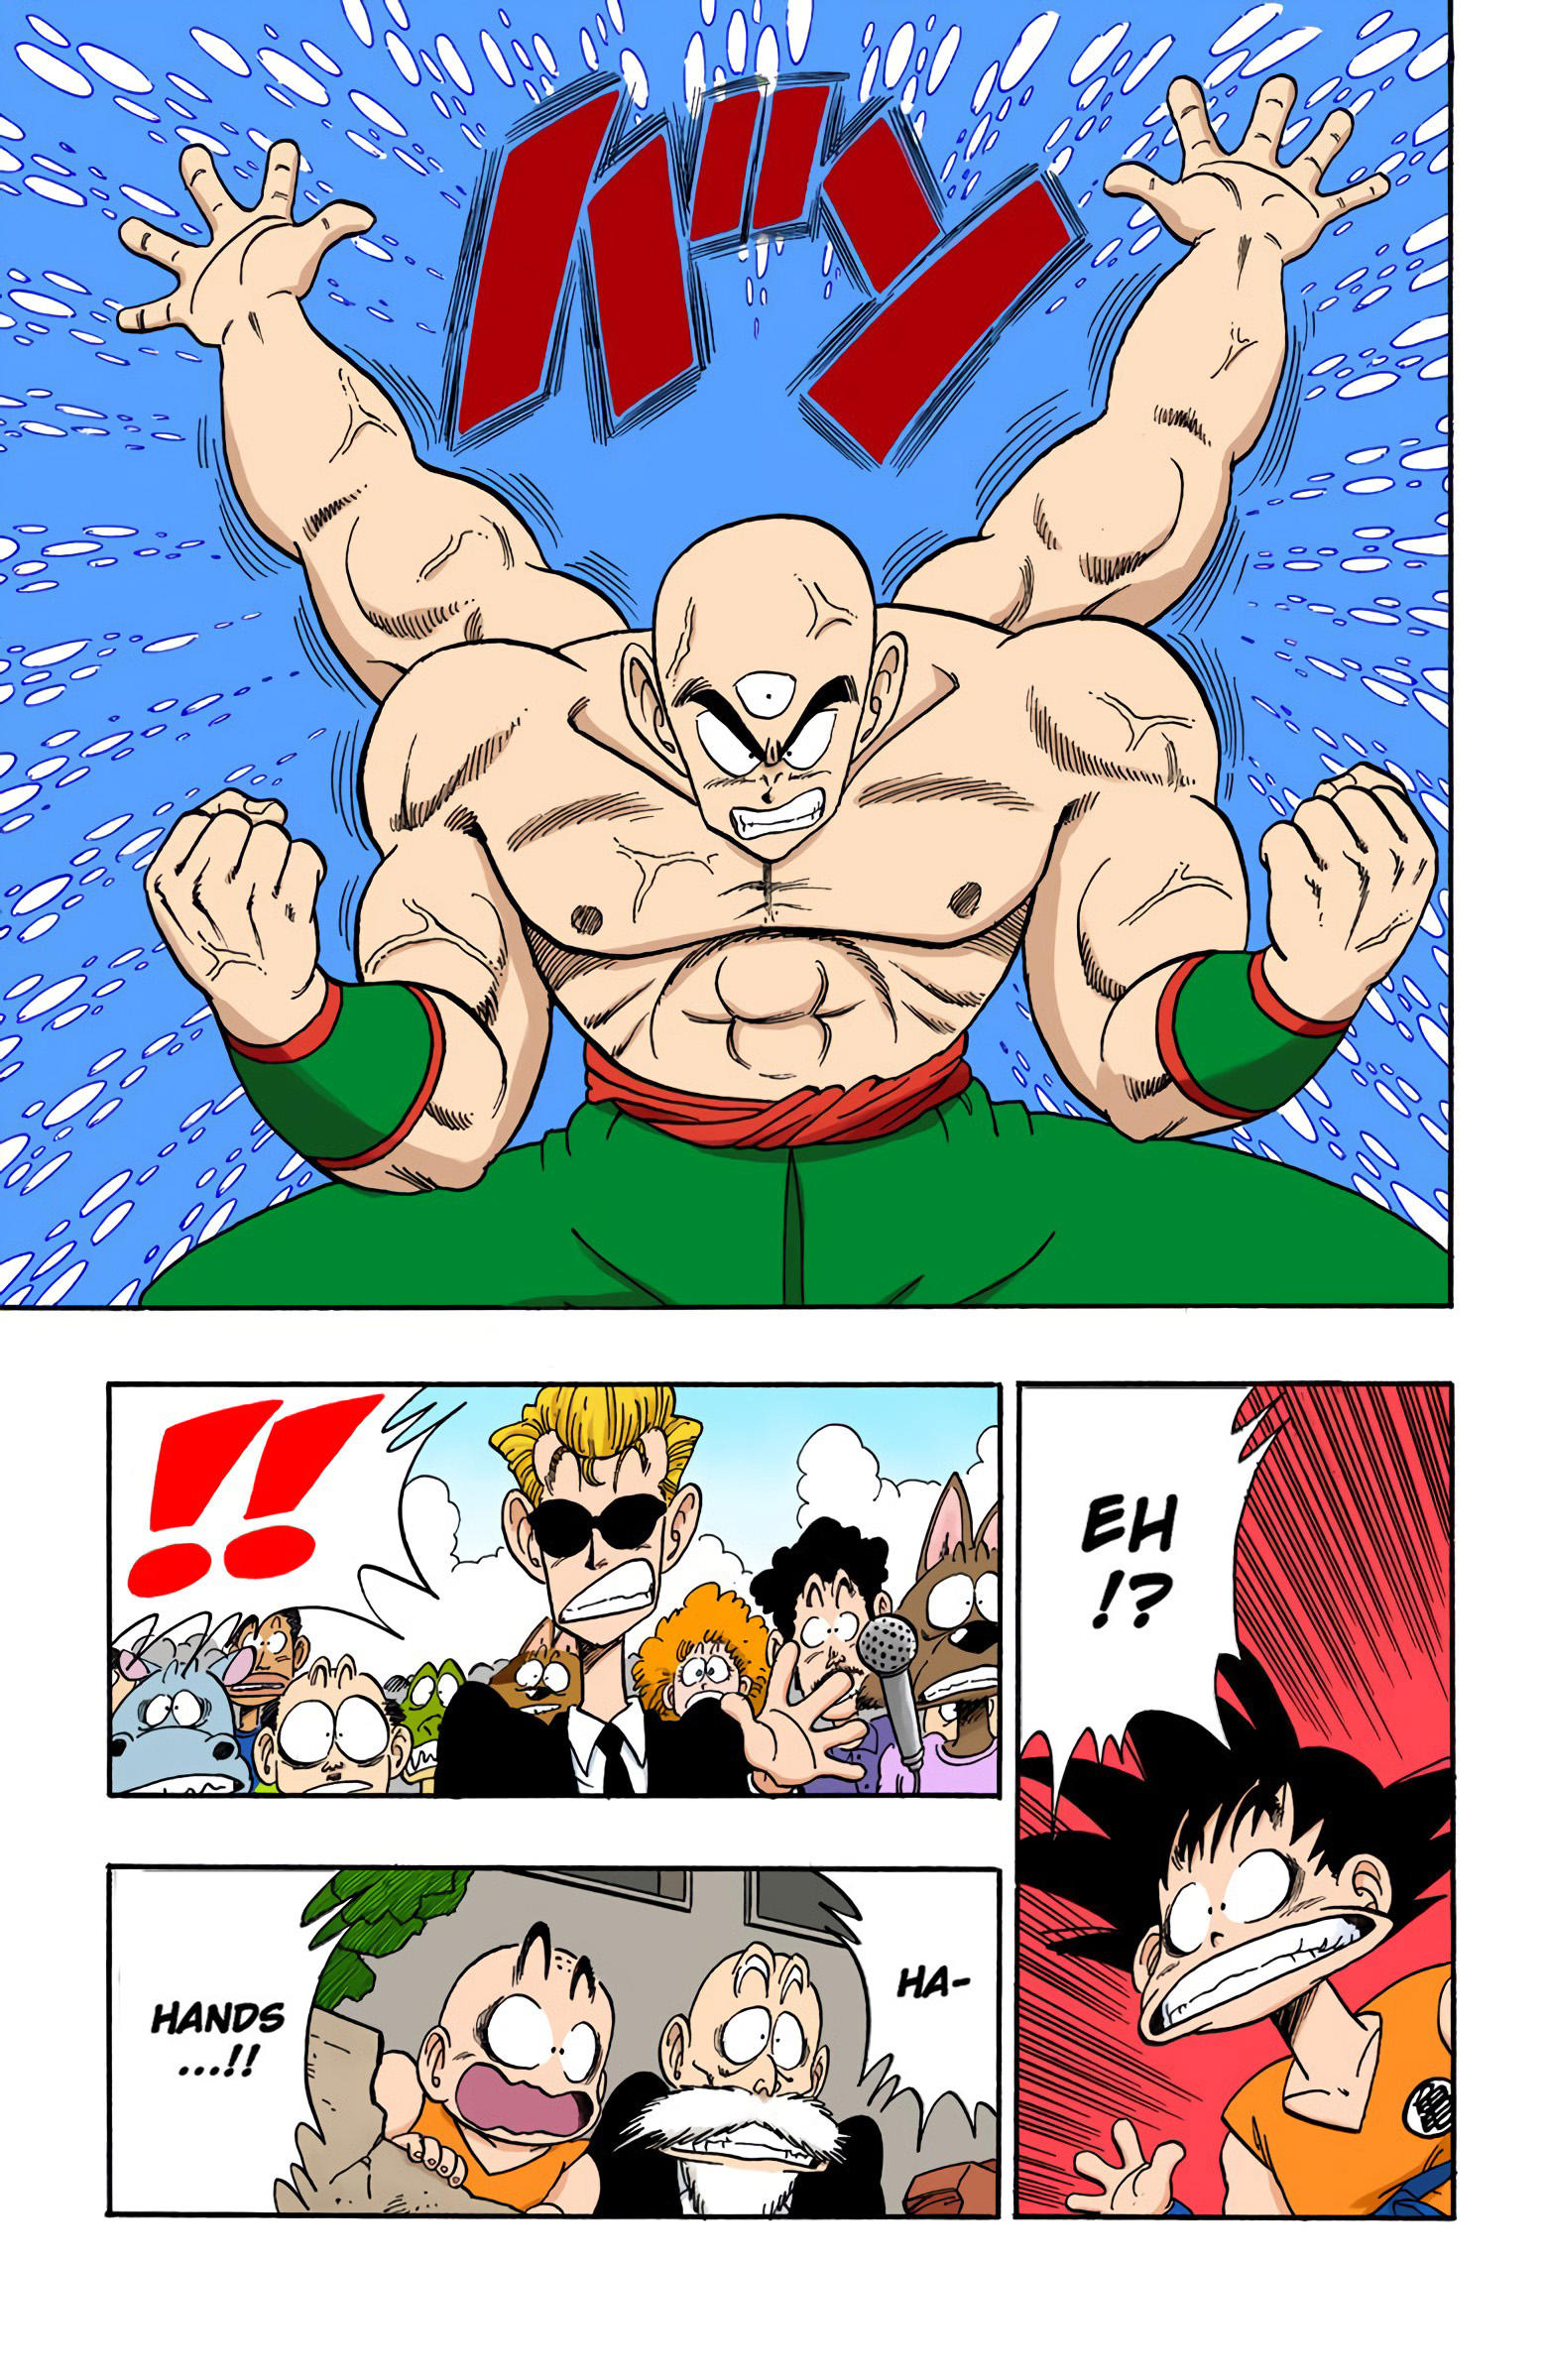 Dragon Ball - Full Color Edition Vol.11 Chapter 132: The Arms Race page 5 - Mangakakalot